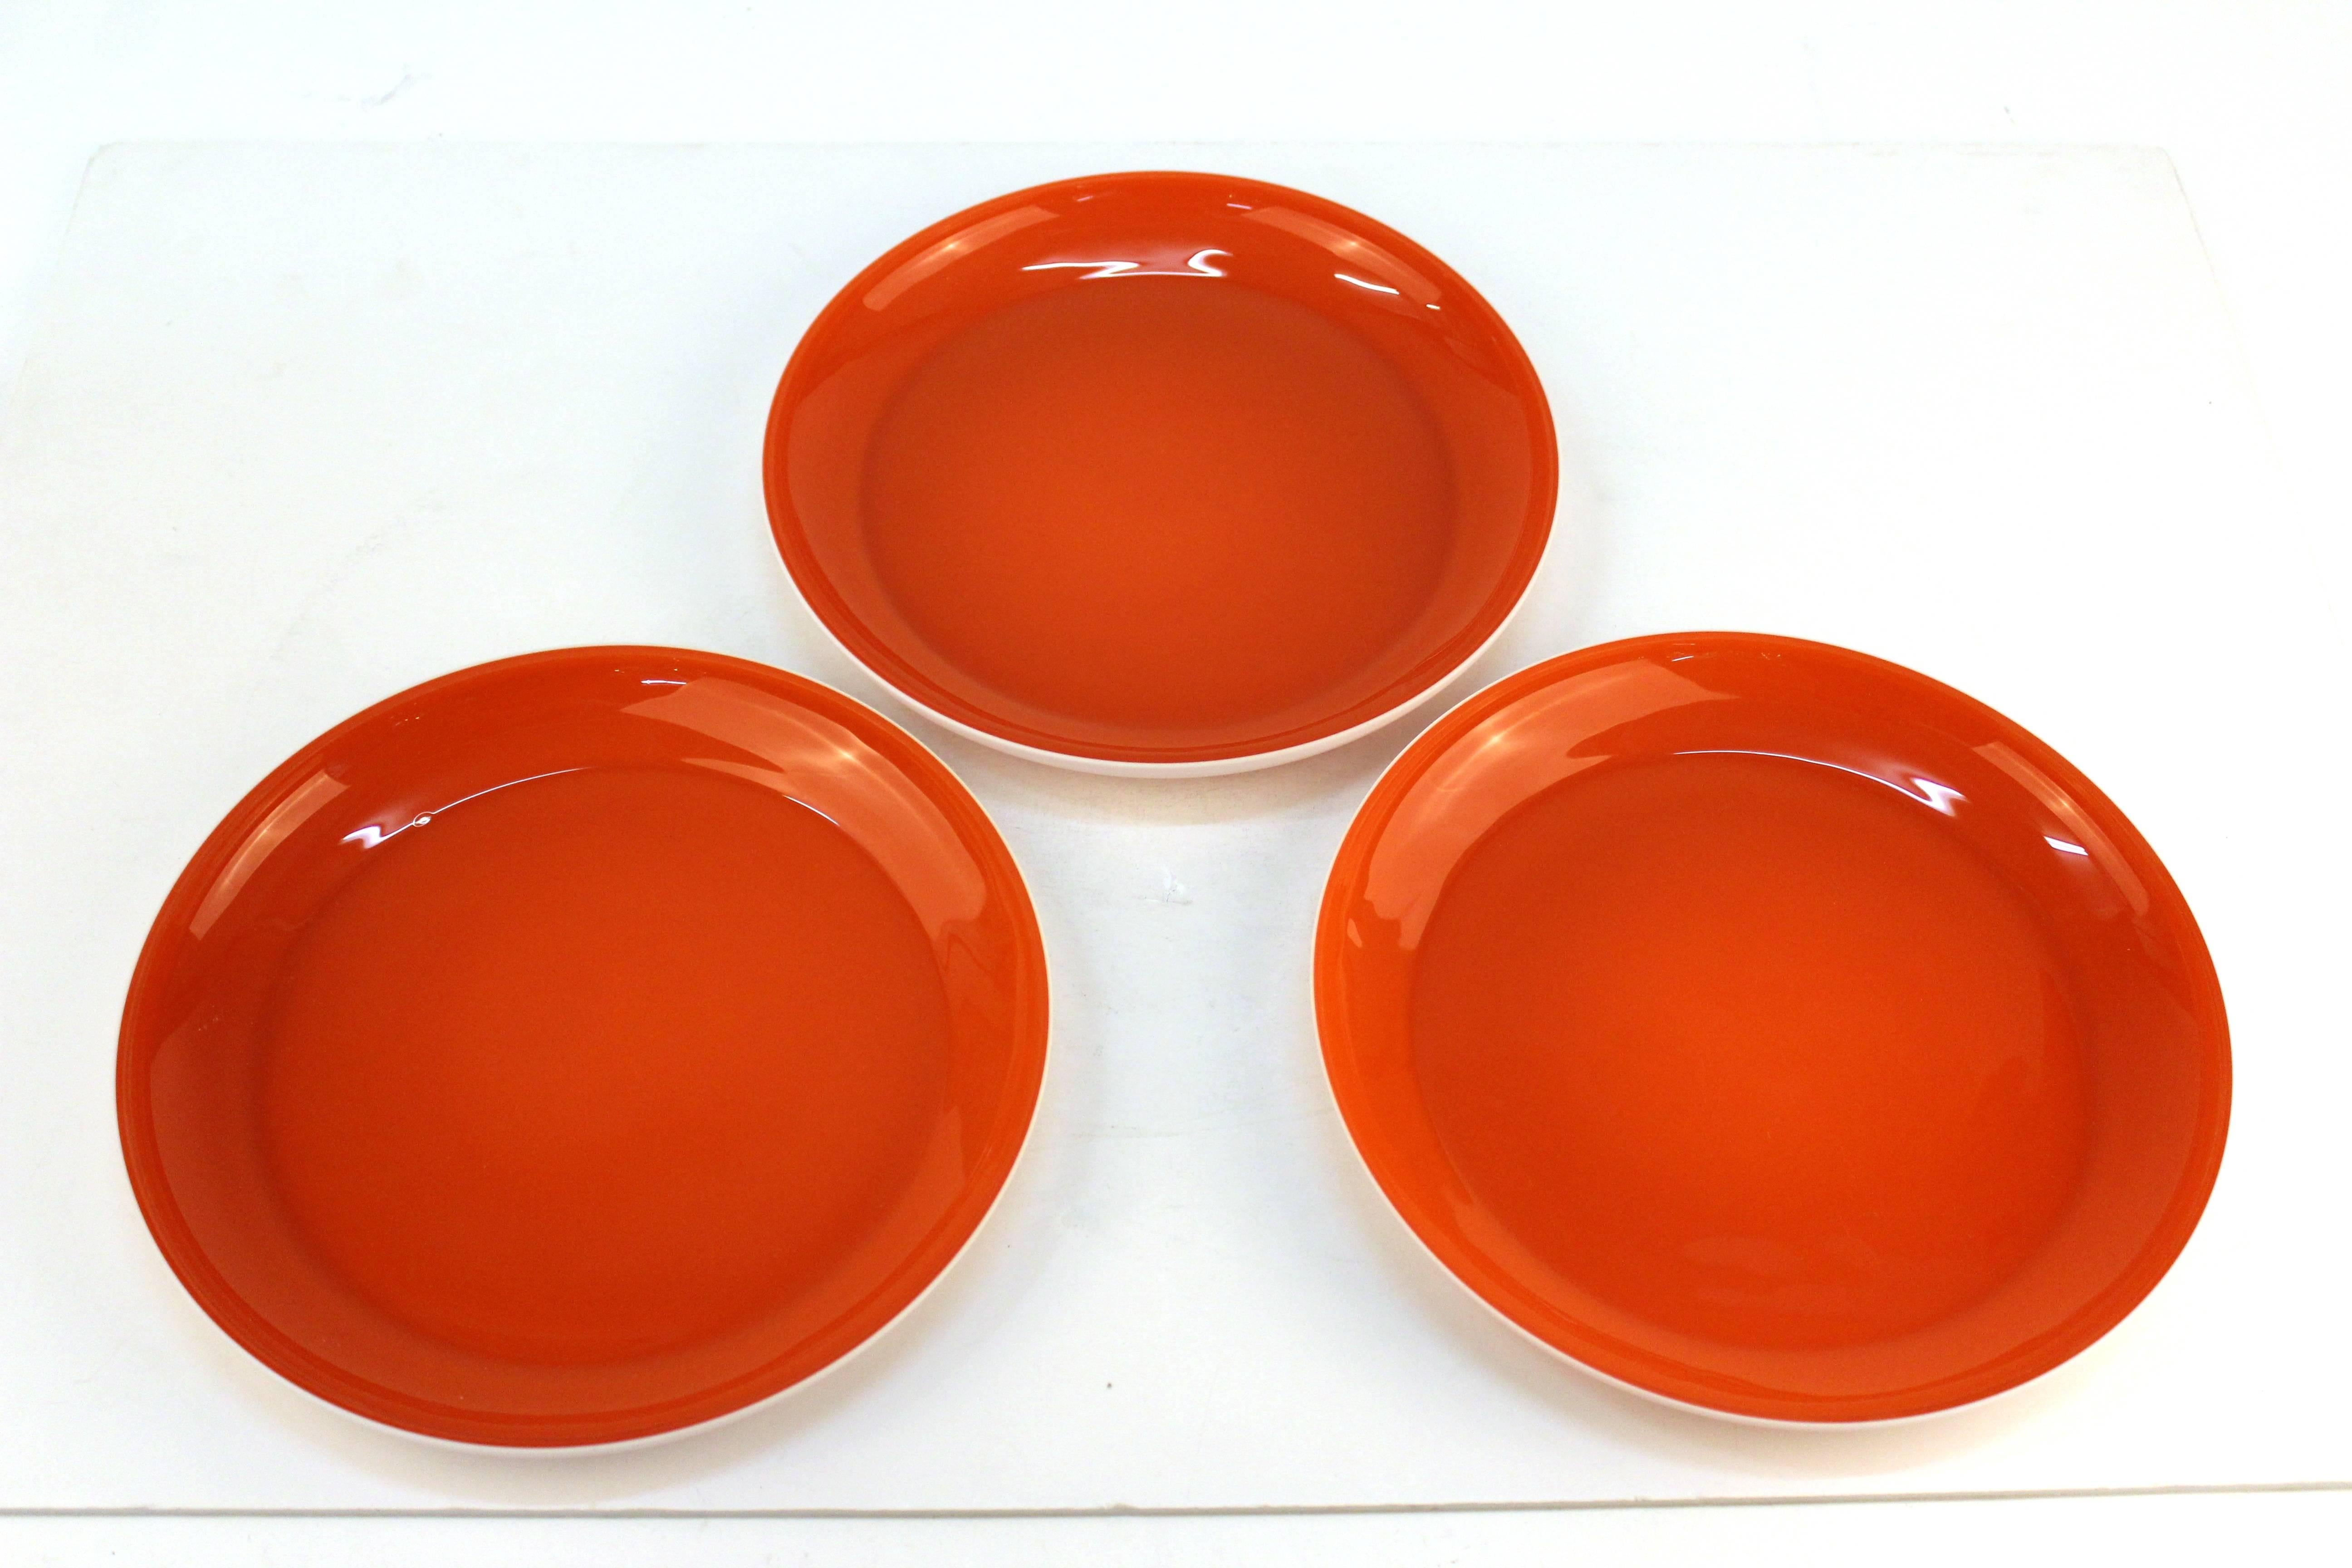 Set of Carlo Moretti plates including eight luncheon plates and three serving plates with bright orange interior and white exterior. Can be purchased as individual sets. See prices below:

Luncheon plate, Set of Eight (1" H x 7" D):